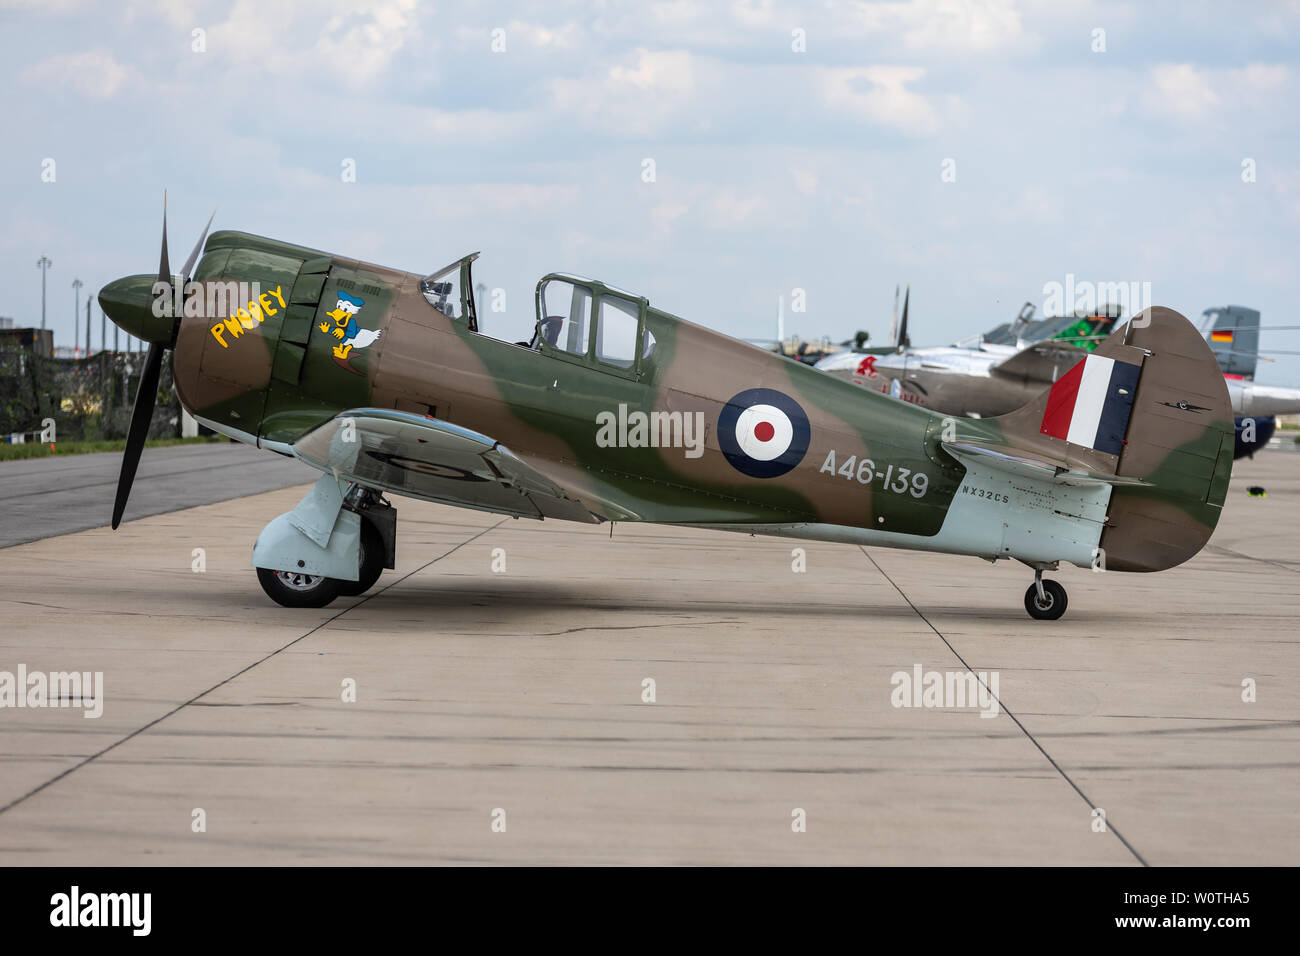 BERLIN - APRIL 27, 2018: Fighter aircraft CAC Boomerang on the airfield. Exhibition ILA Berlin Air Show 2018. Stock Photo